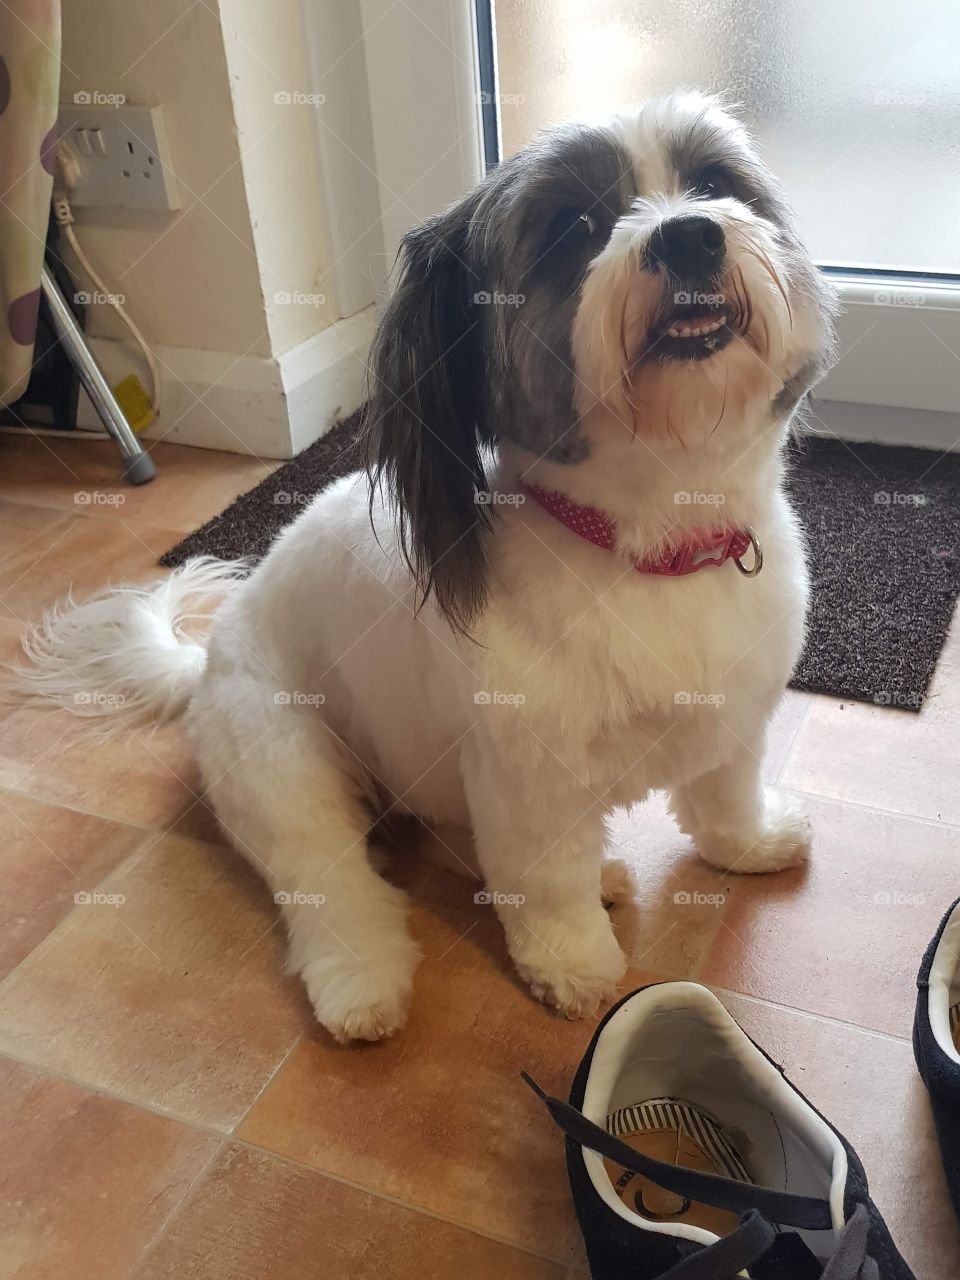 My Daughters dog Tilly the Shih Tzu  after going to the groomers